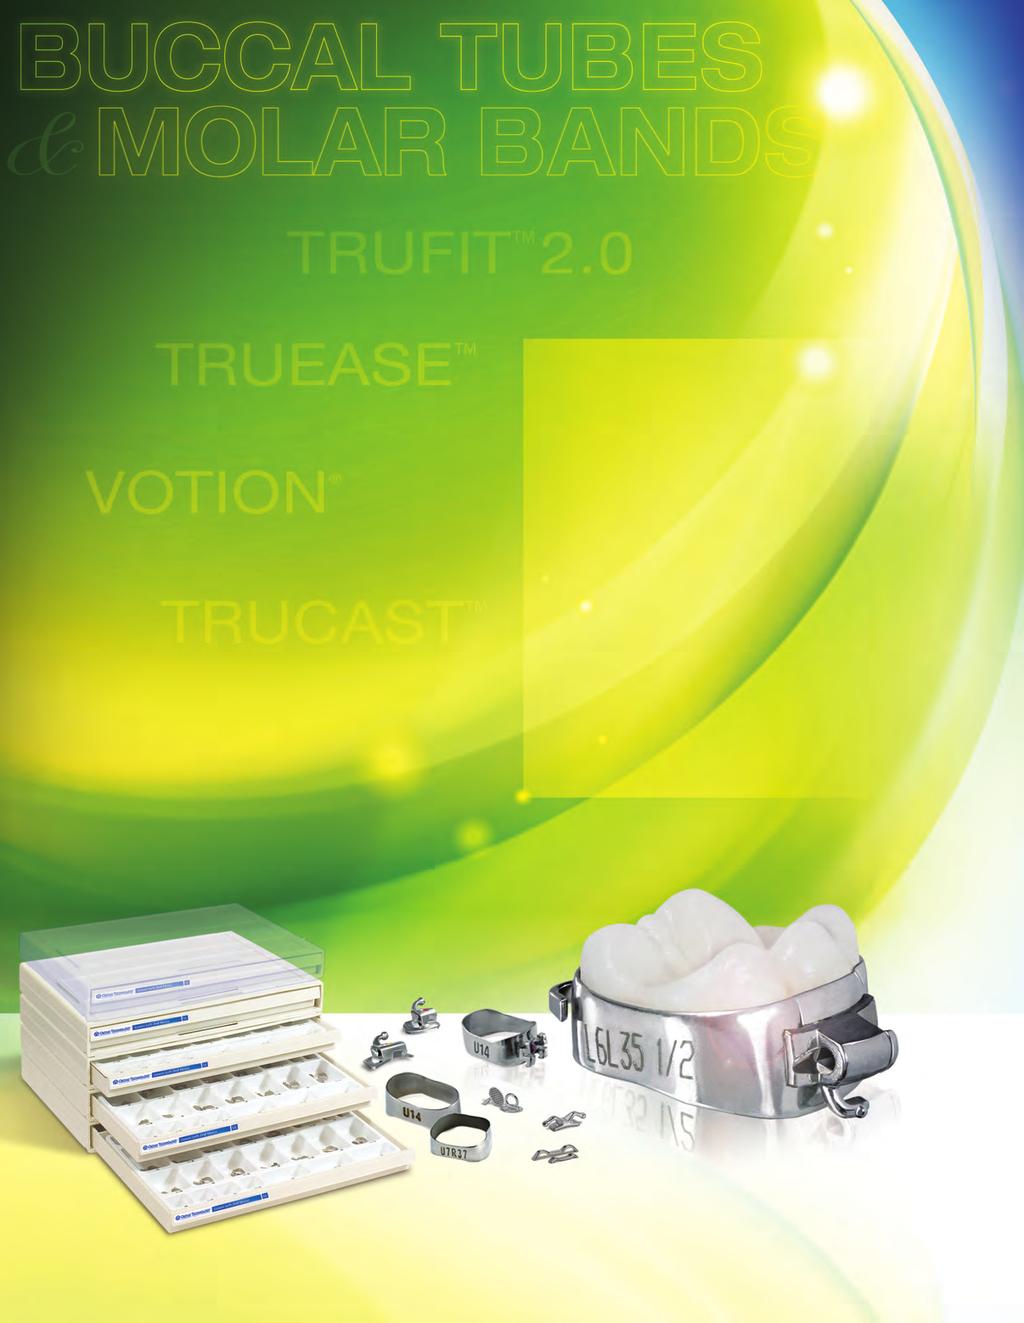 BUCCA TUBES & MOA BANDS Tubes & Bands TruFit 2.0 P. 55-67 Bondable Buccal Tubes P. 55-57 Weldable Buccal Tubes P. 58-59 Molar Bands P. 60 Prewelded Band & Tube Assemblies P.